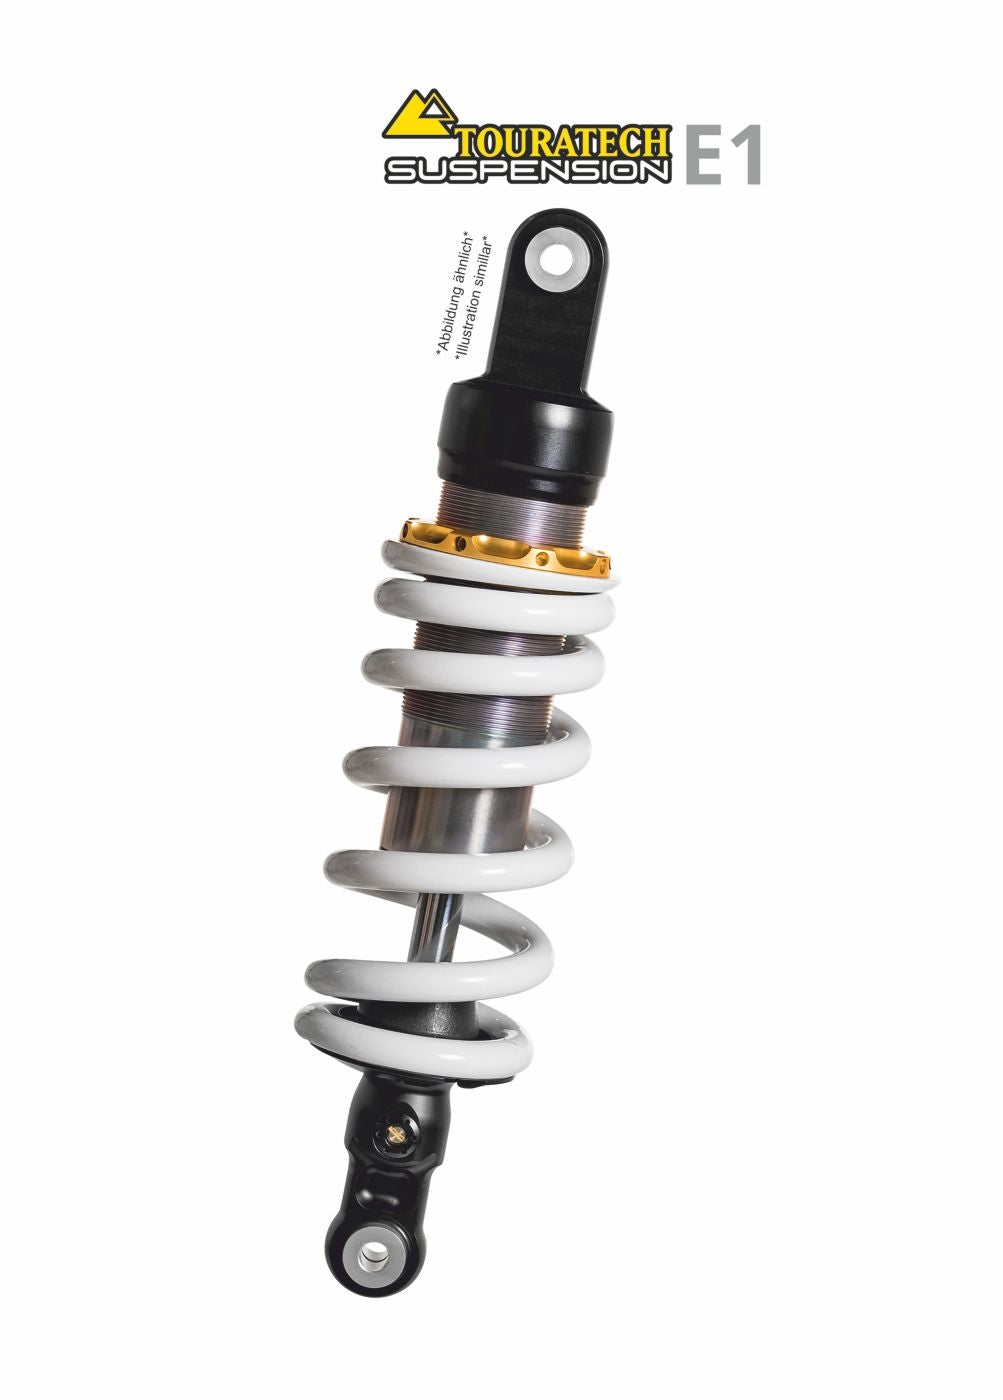 Touratech Suspension E1 shock absorber for Yamaha FZR 1000 EXUP 1989 - 1995